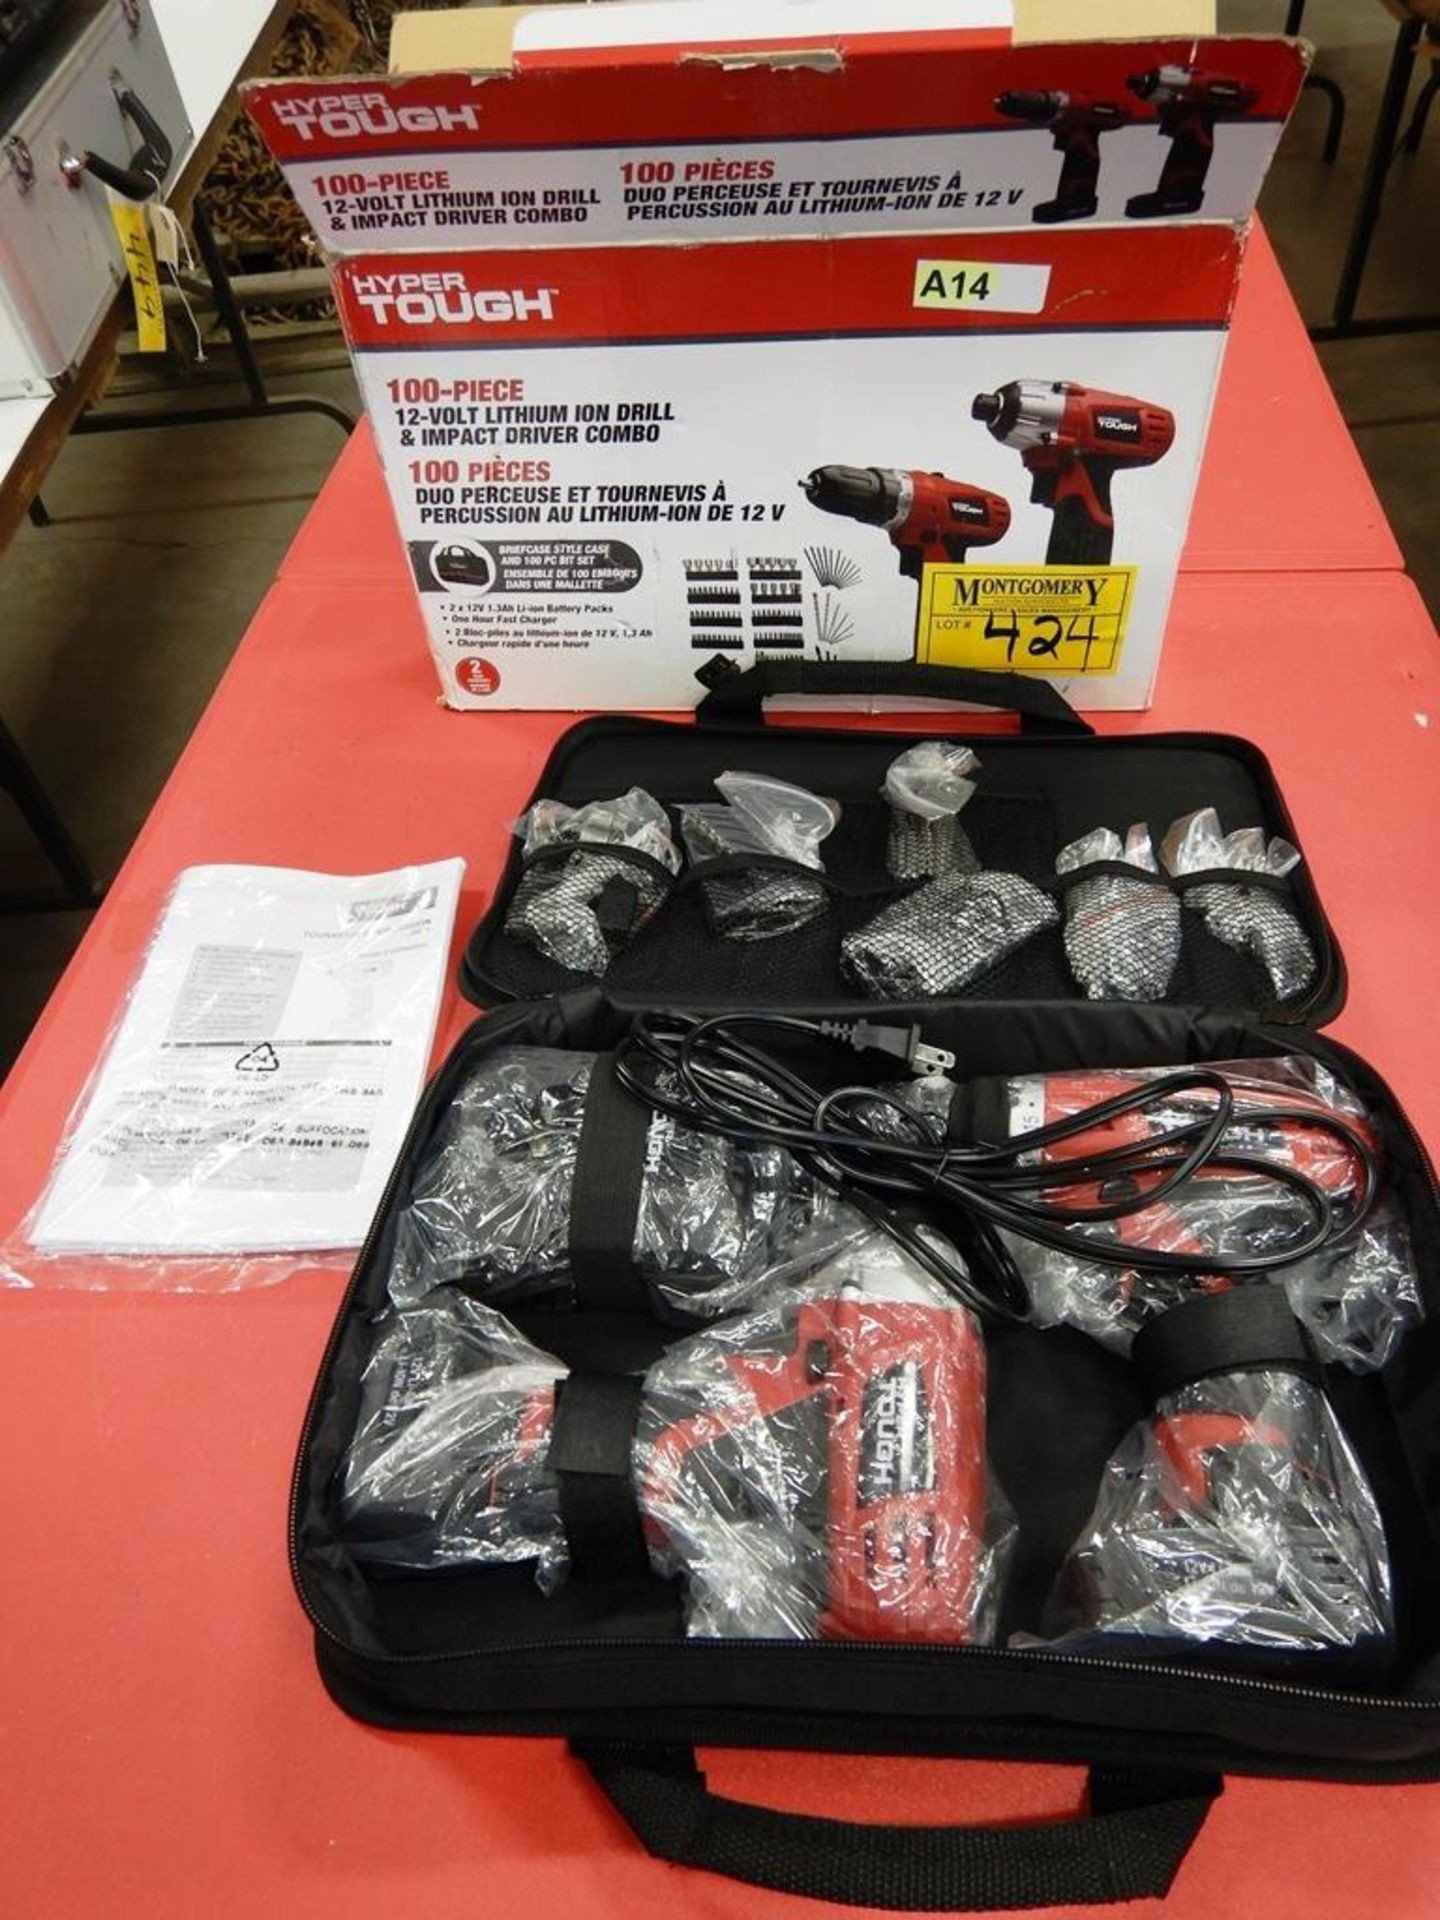 HYPER TOUGH 100-PIECE 12V LITHIUM ION DRILL AND IMPACT DRIVER COMBO *NEW*A14